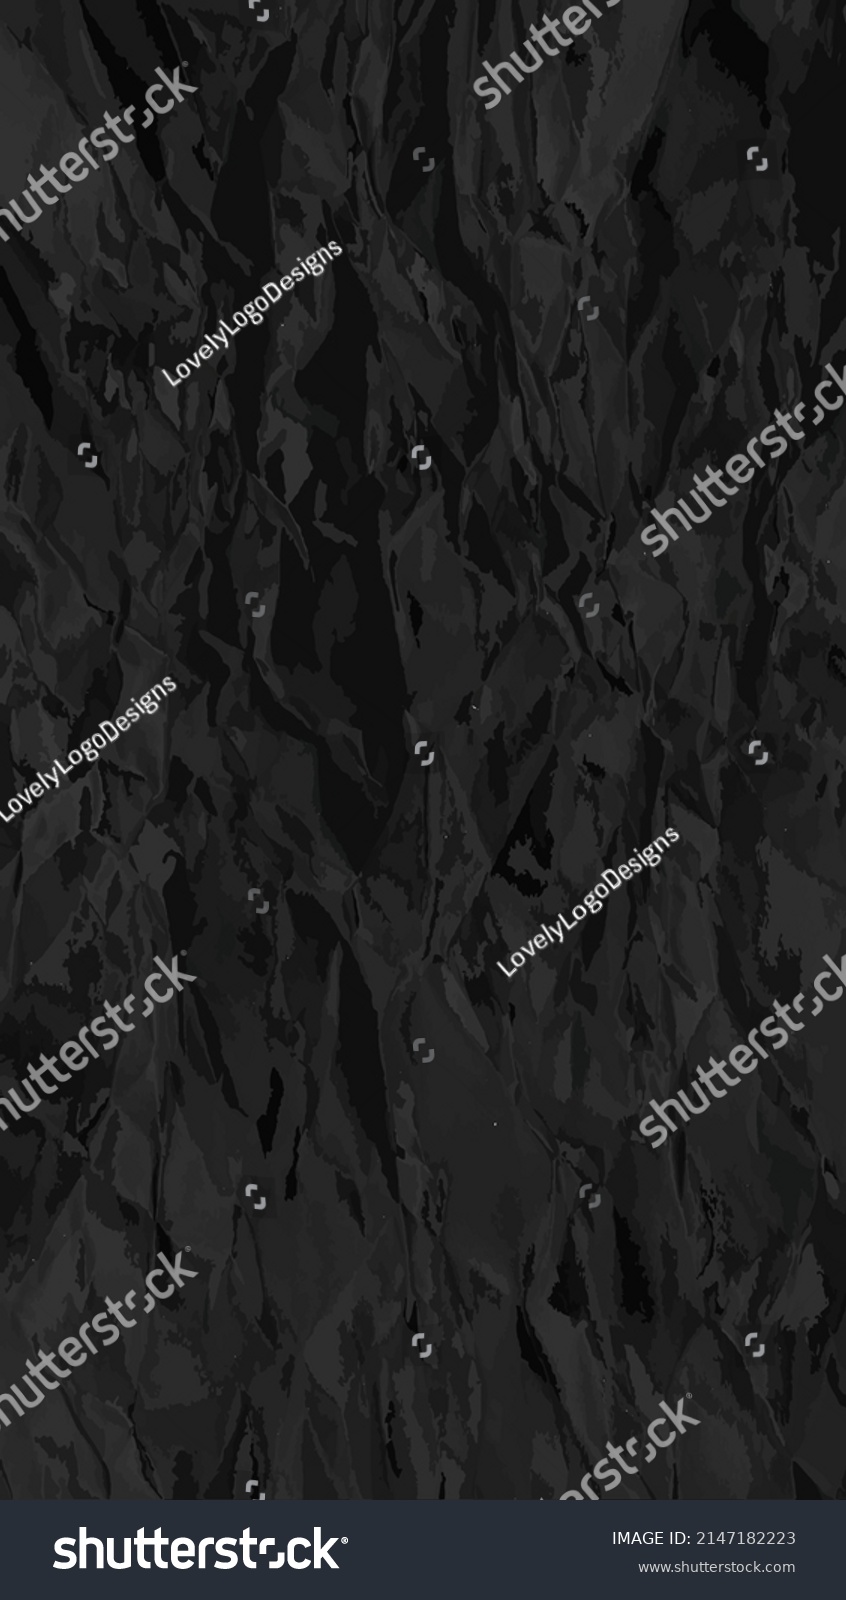 Realistic Black Crumpled Paper Texture Isolated Stock Vector Royalty